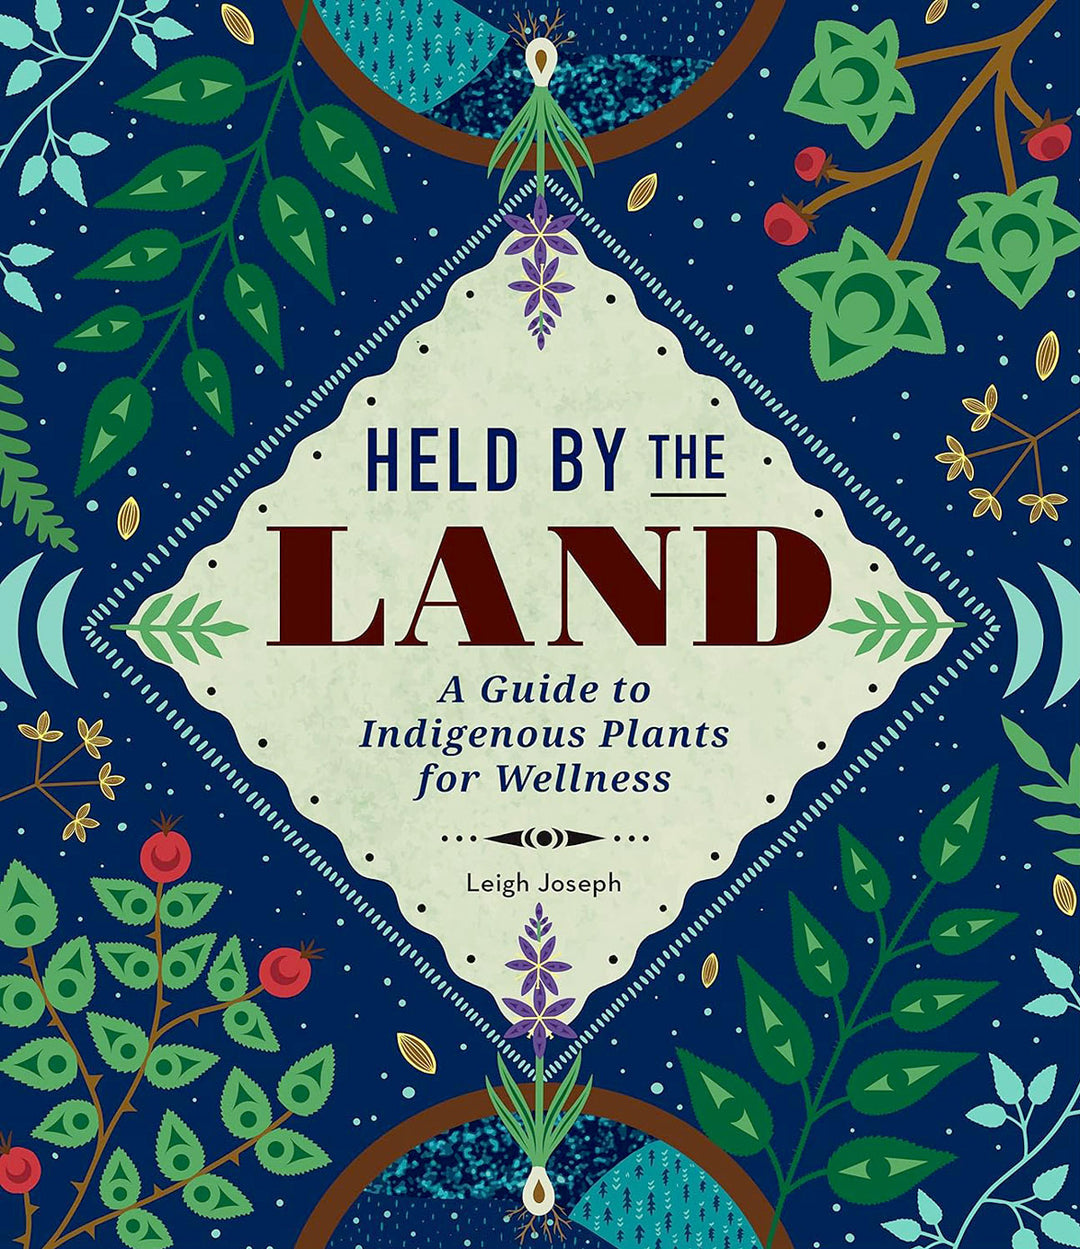 Held by the Land: A Guide to Indigenous Plant Wellness by Leigh Joseph